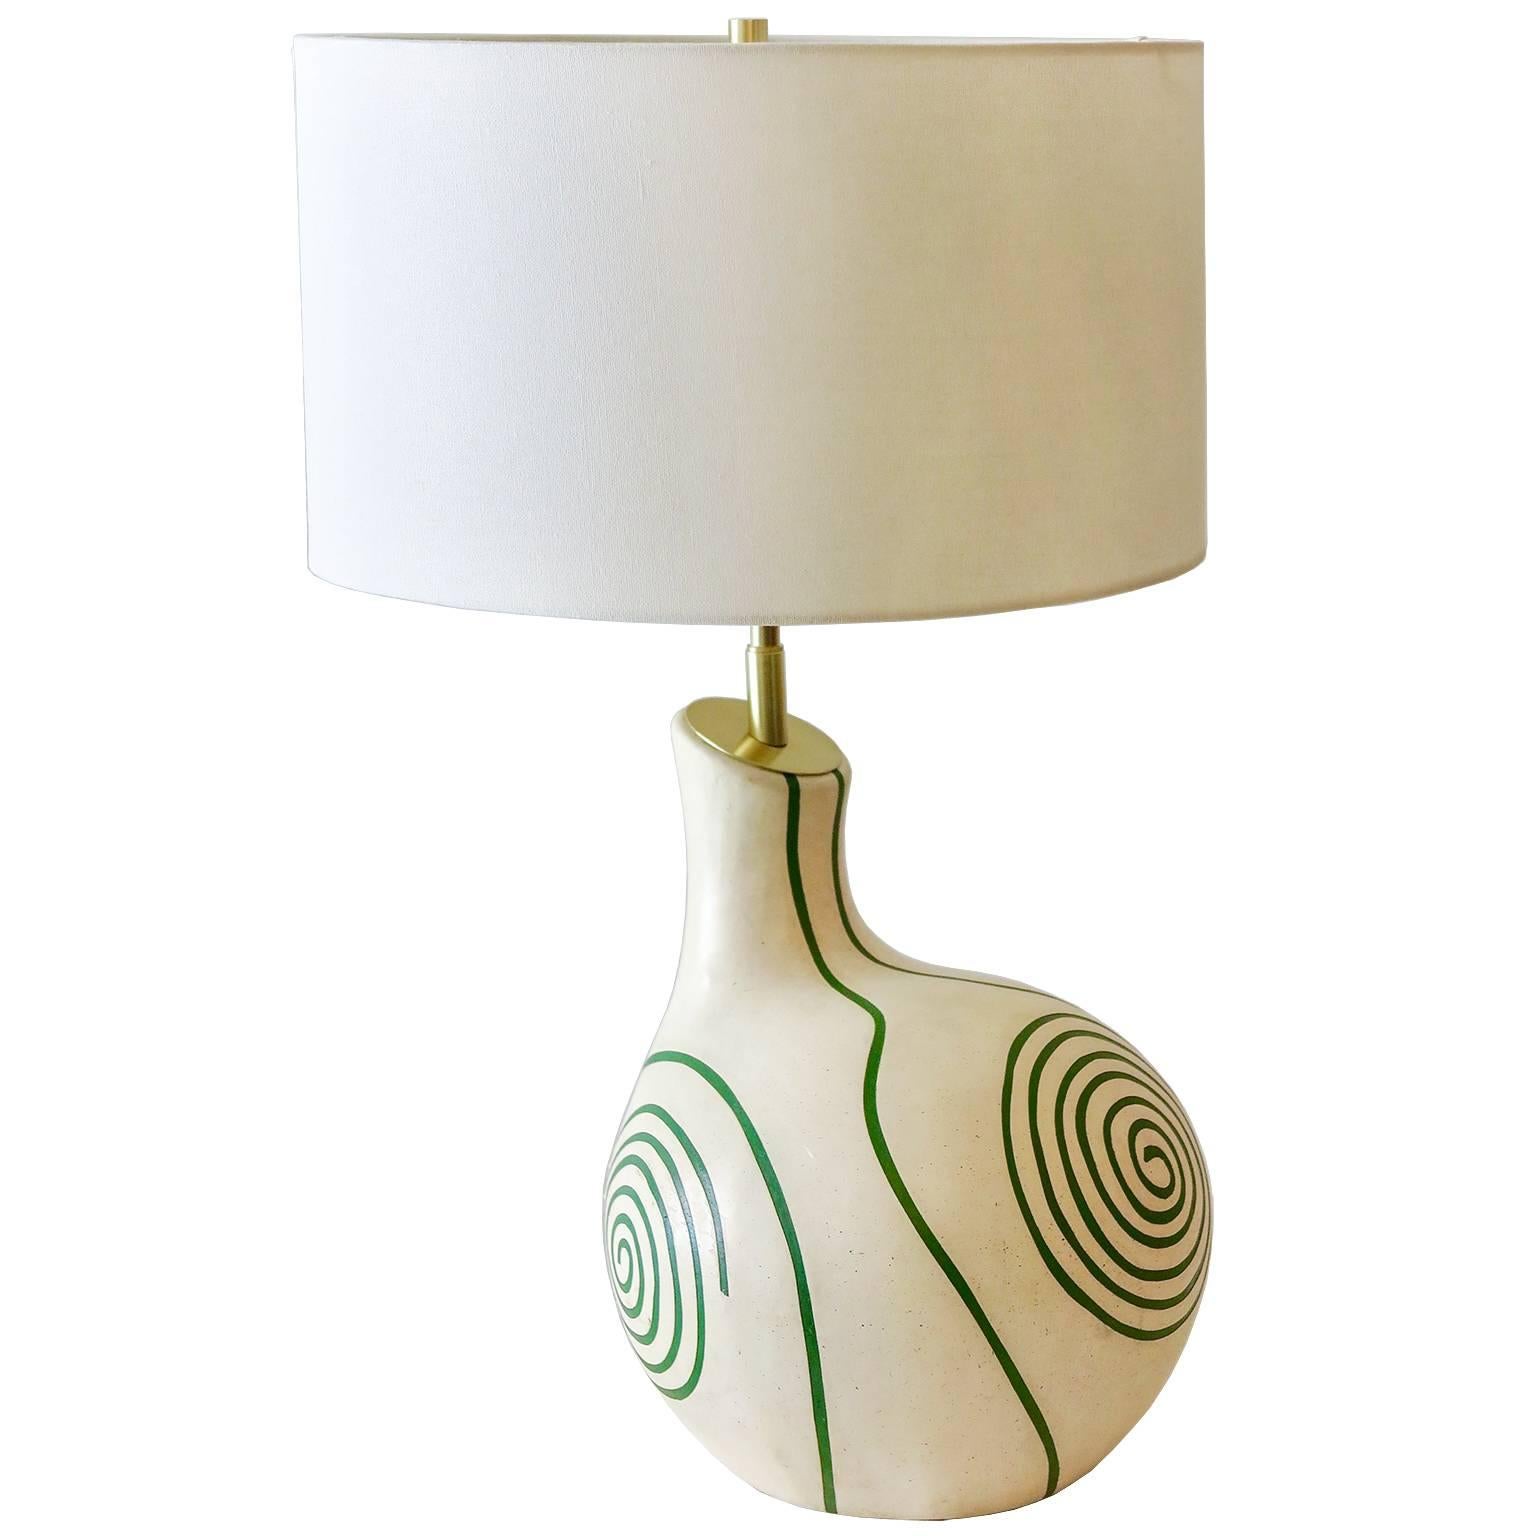 Mid-20th Century, French Ceramic Table Lamp with Swirl Design